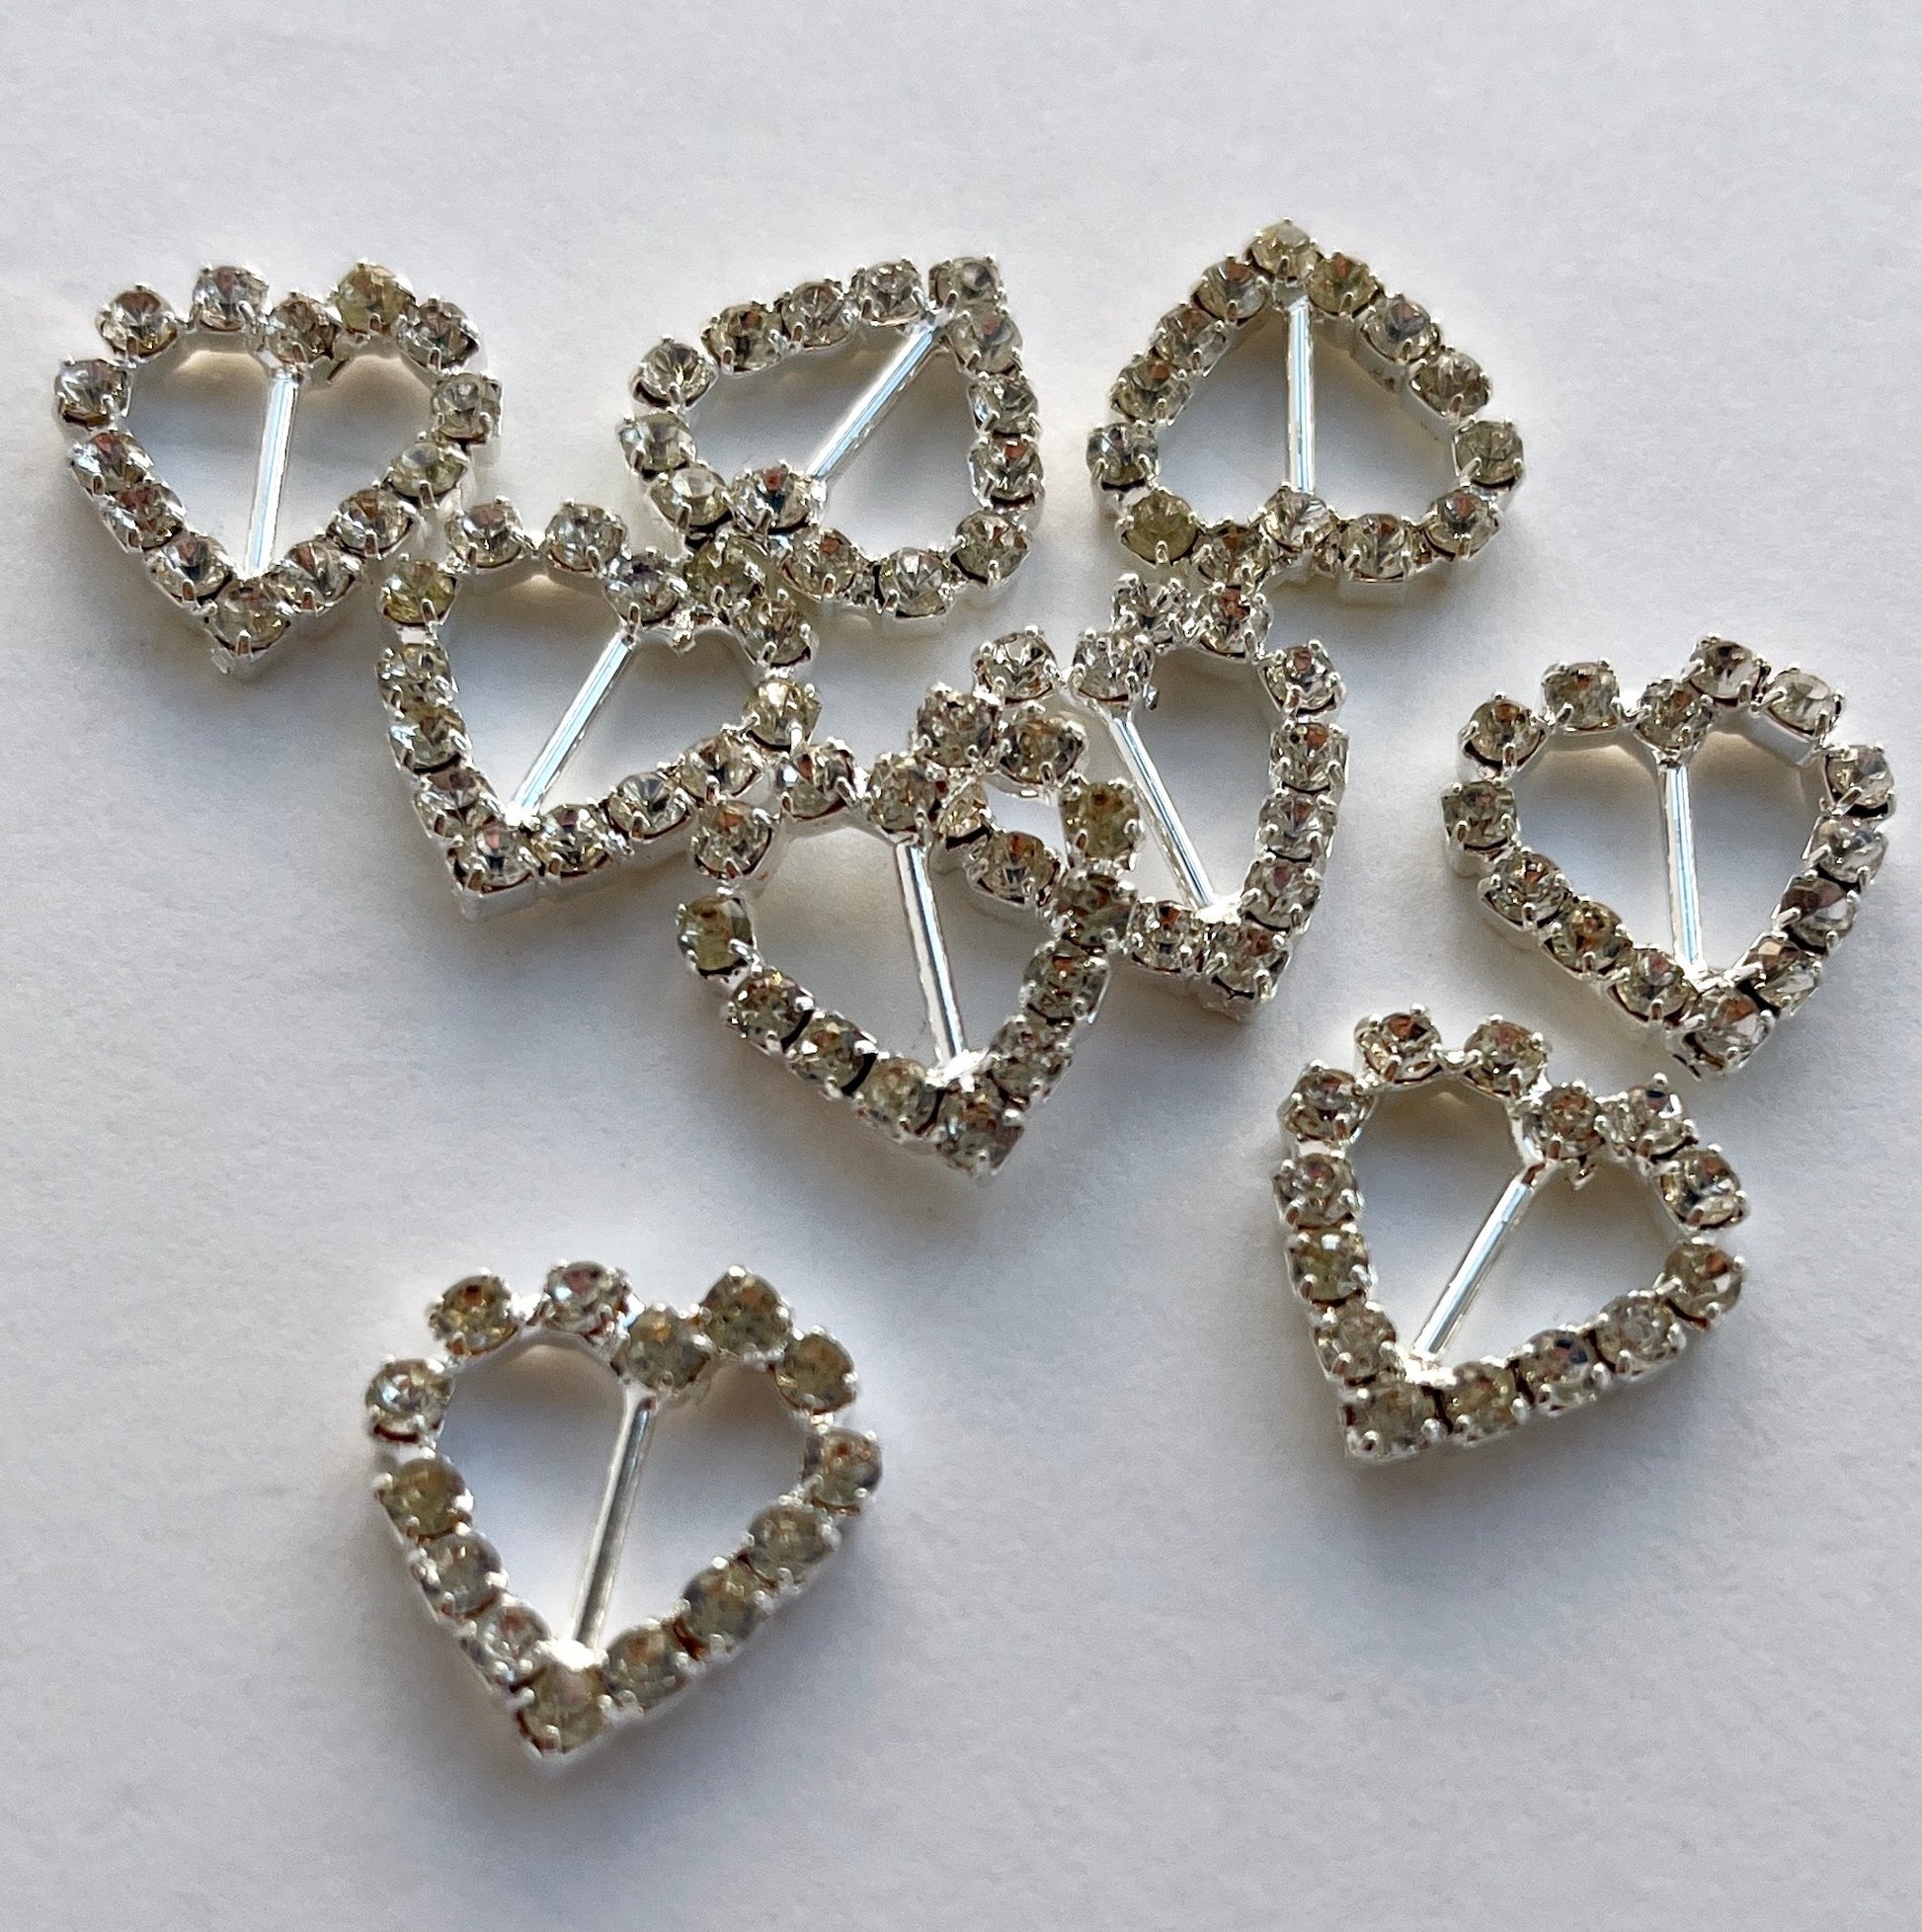 Lovely, high quality, rhinestone crystal slider buckles. Easy to use, just slide onto a ribbon or a strap to add sparkle to dress straps, bags. Perfect for a spot of DIY to embellish wedding invitations, wedding favours, napkin rings and arts and craft projects. Shown on 1cm (⅜”) wide velvet ribbon. 